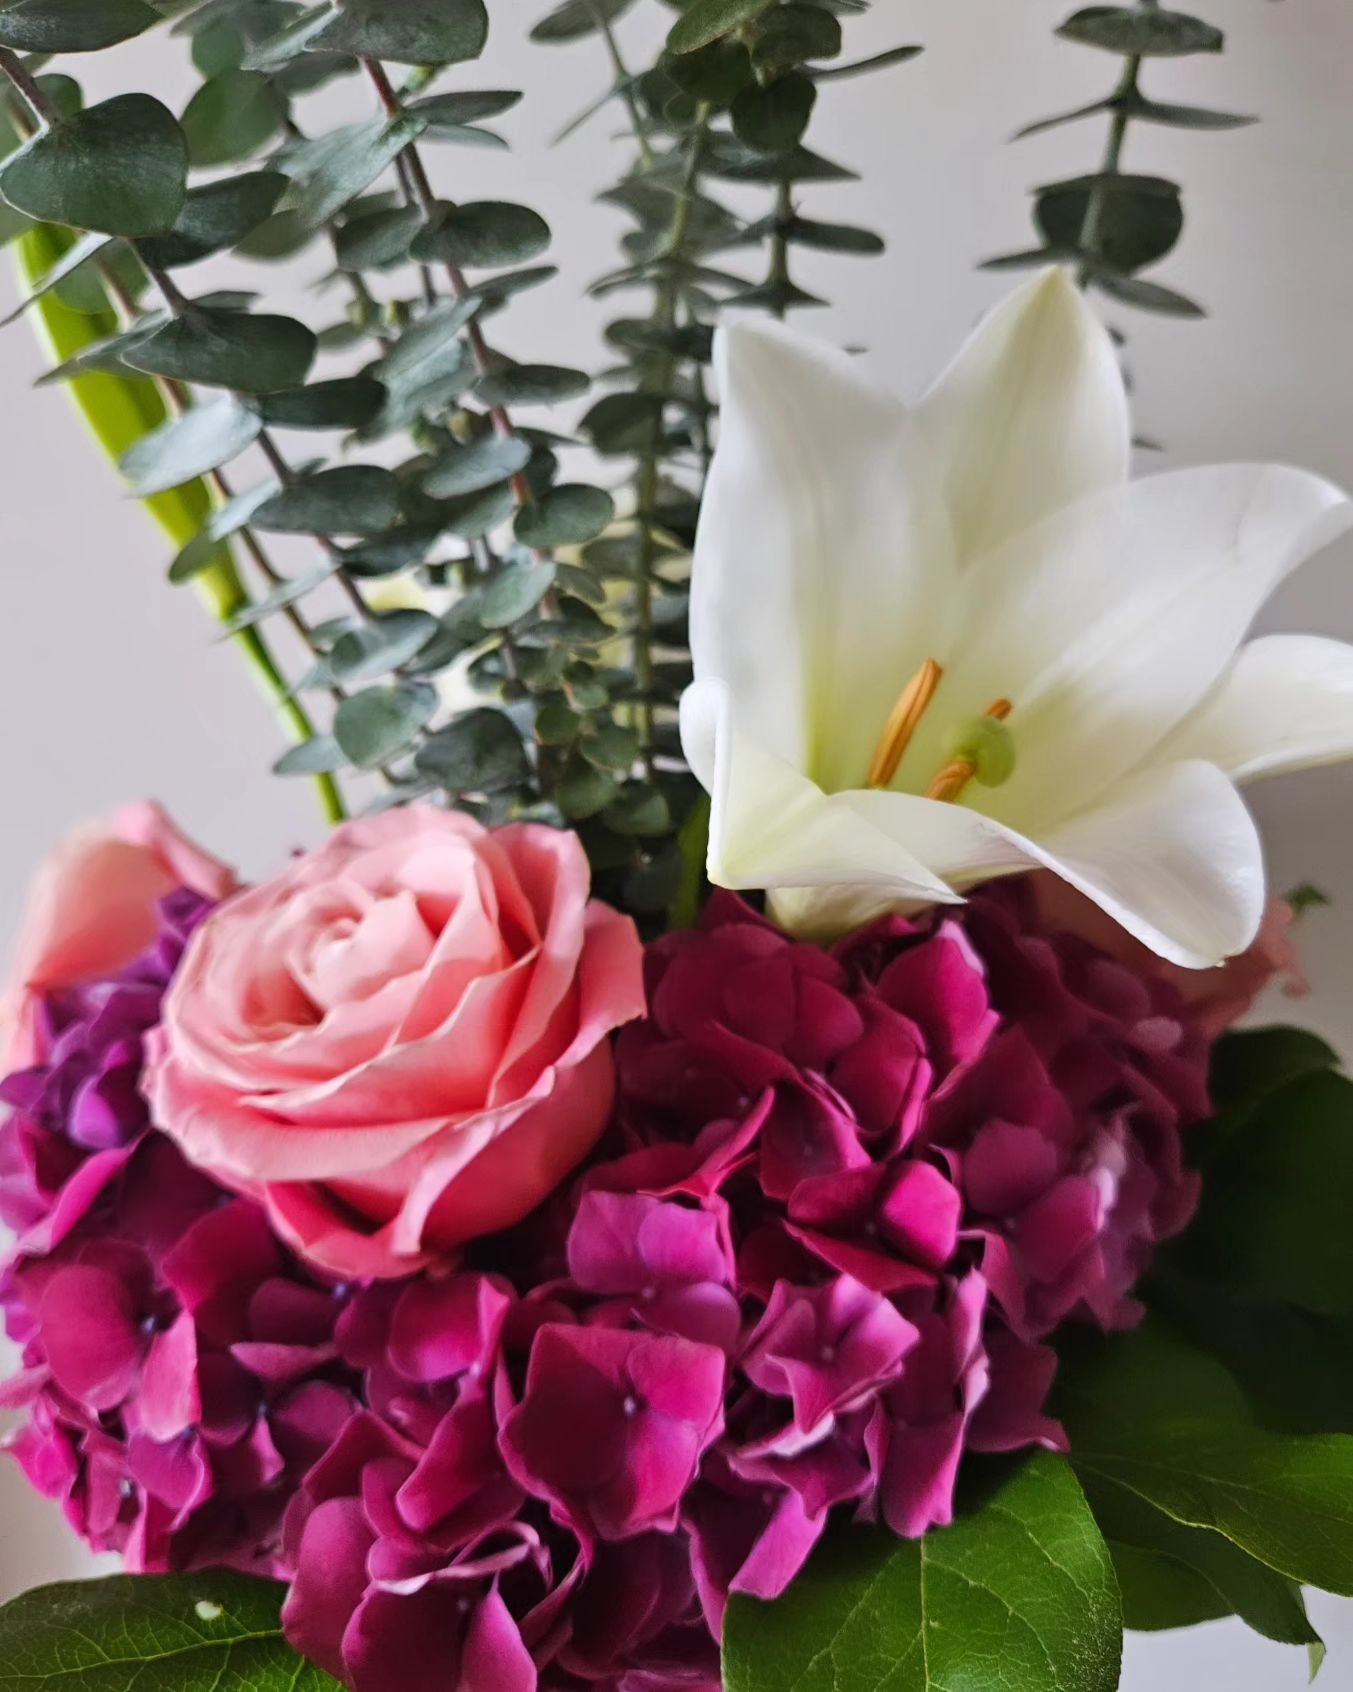 The Designer's Choice bouquets are wild and fun this week! 

Shop online for free next day delivery. Glass vase and gift wrapping included. 

Create a custom bouquet with the florist on Fridays in Williamsburg.